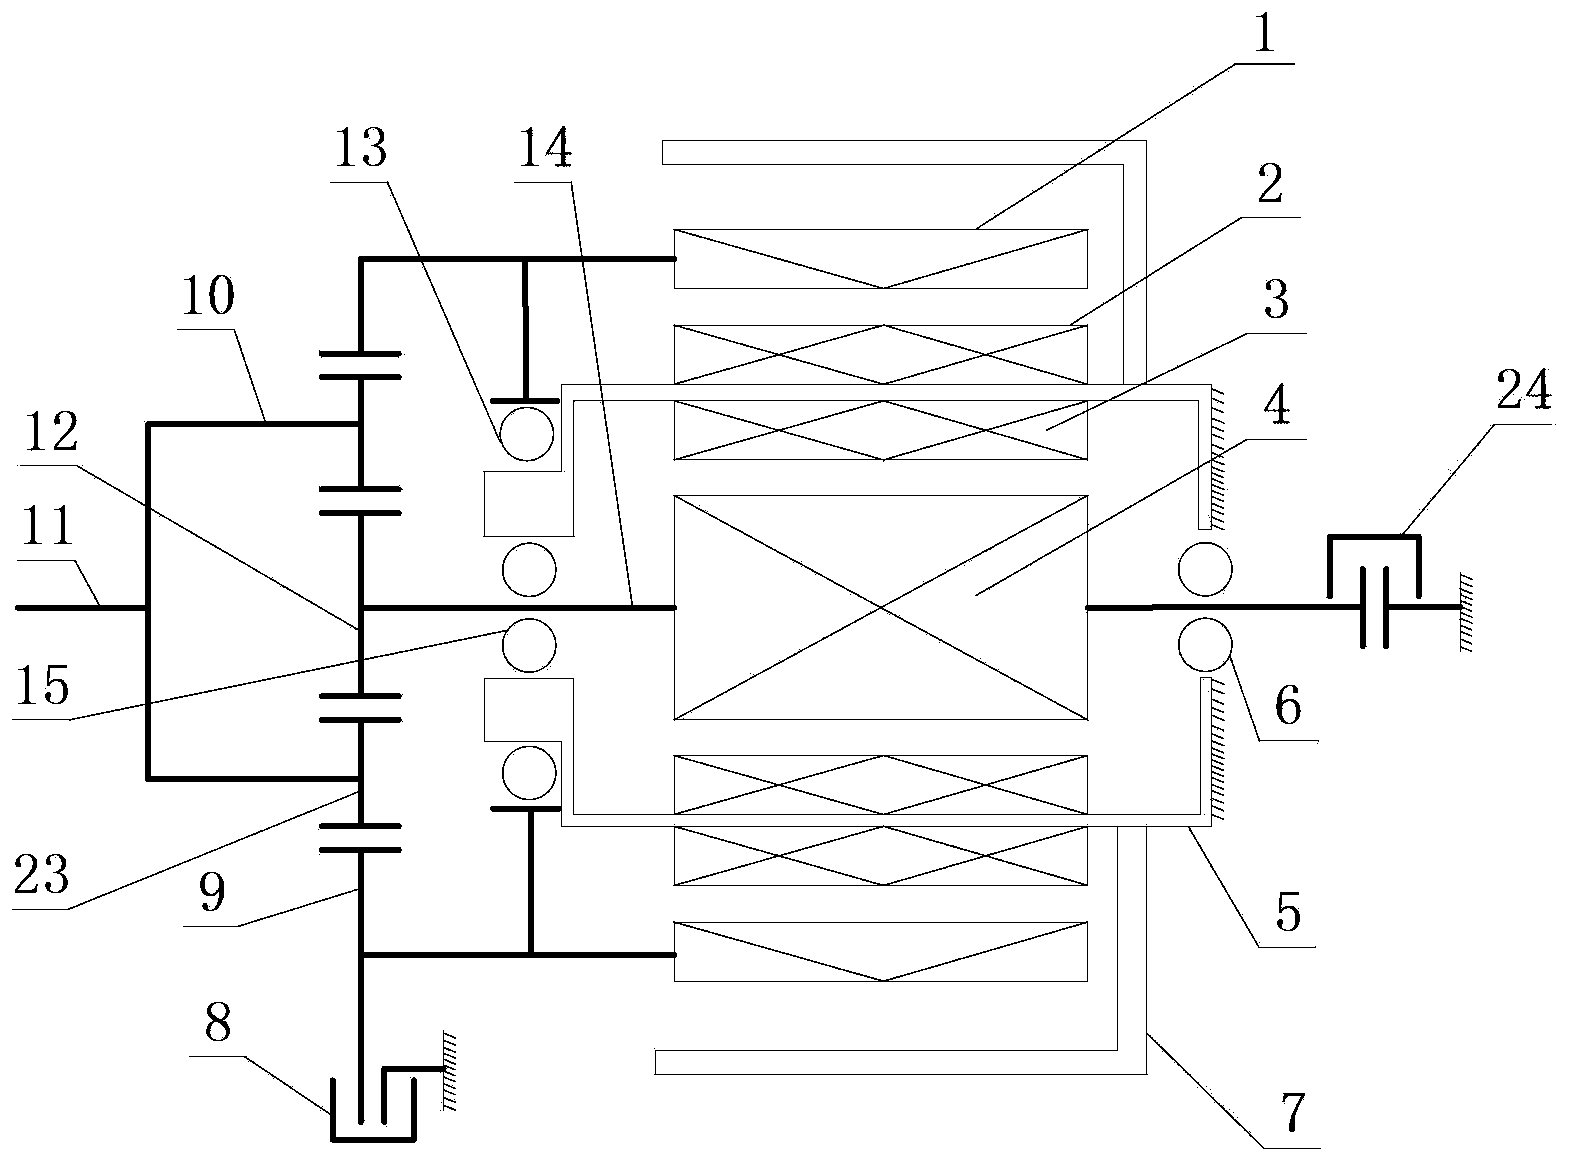 Different connection motor